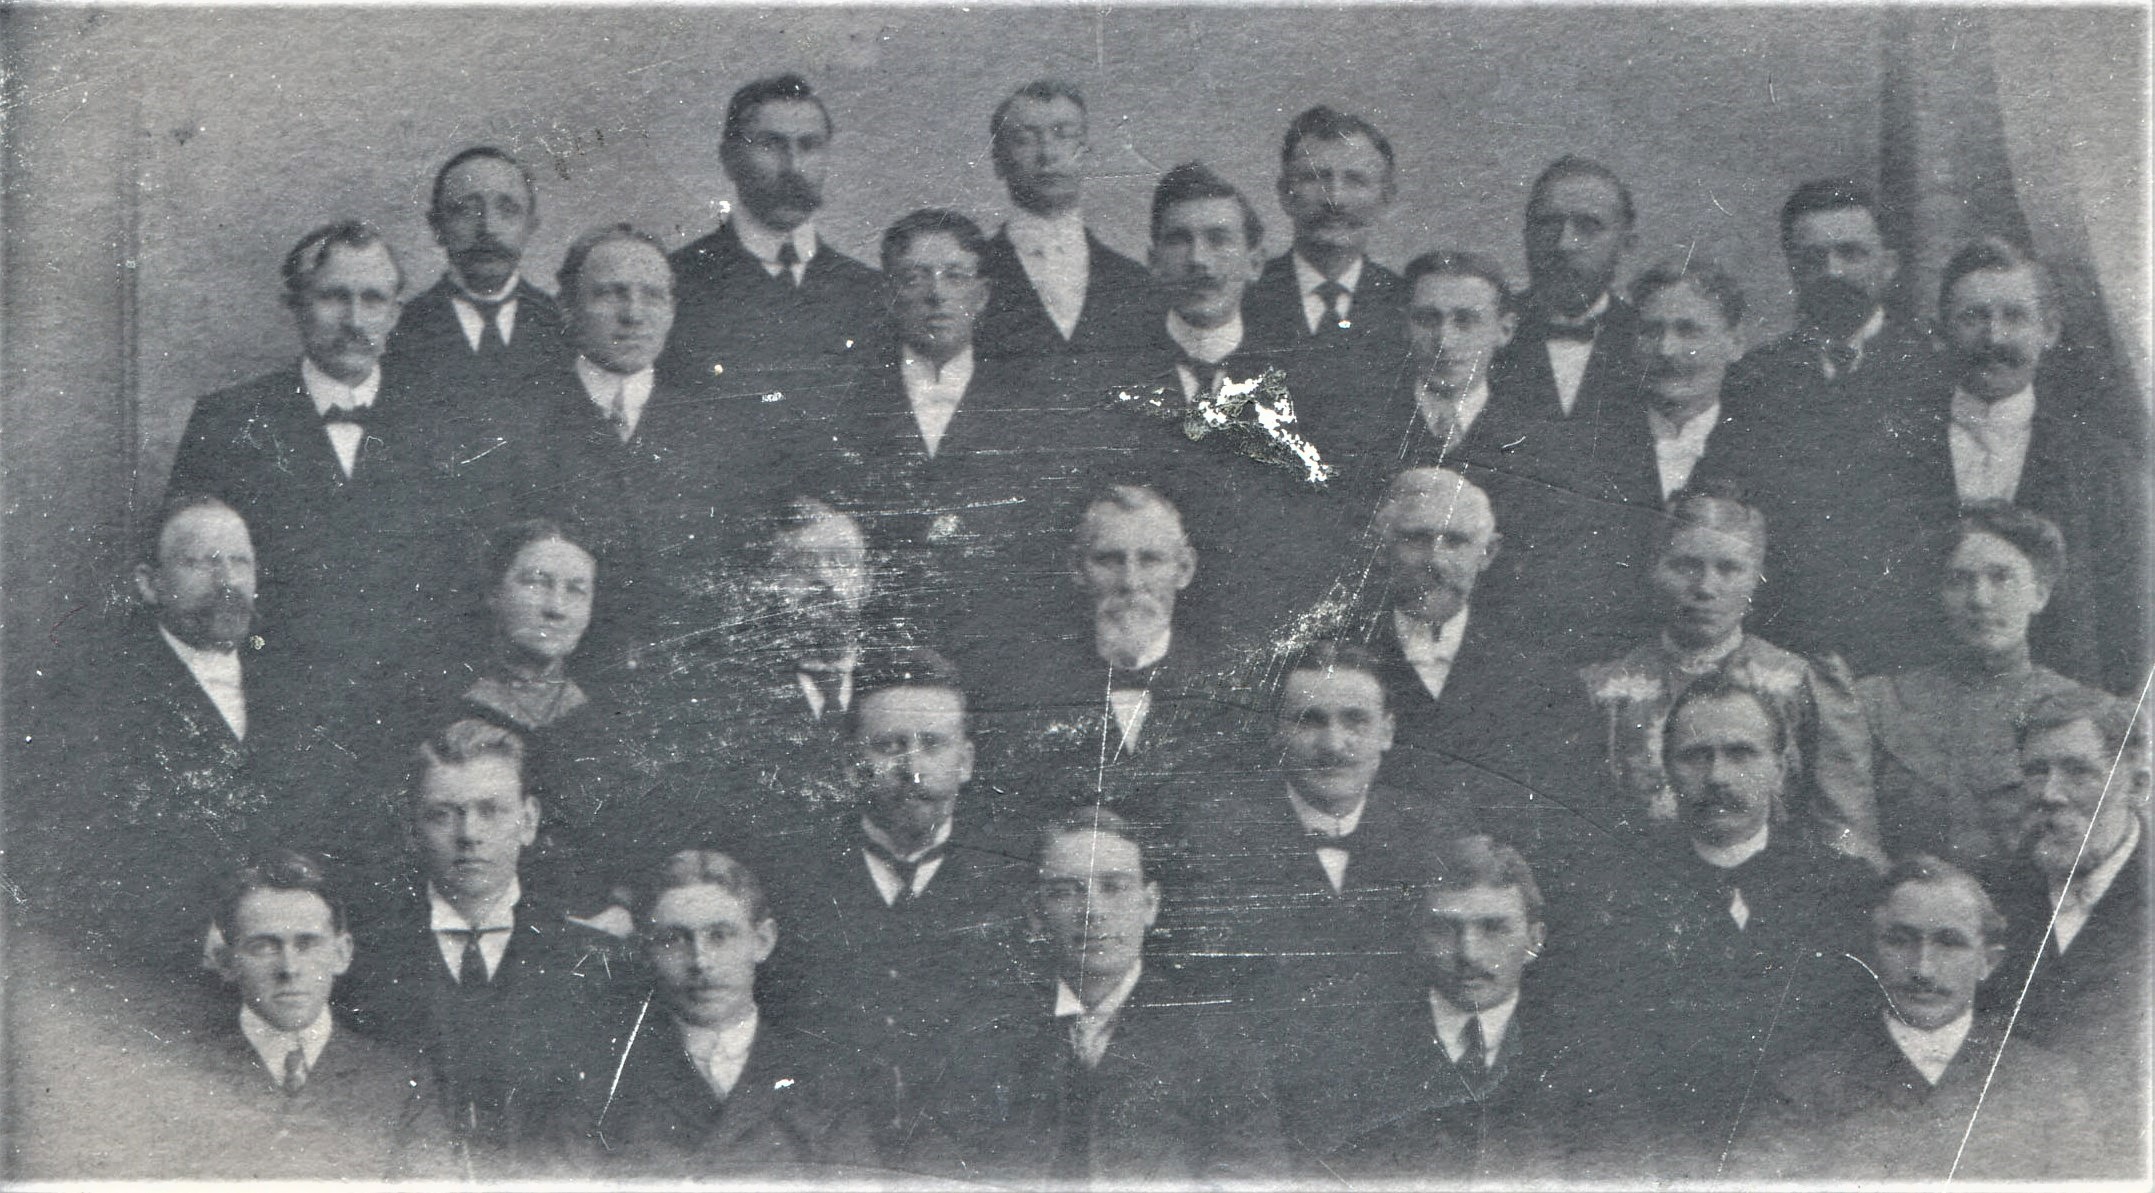 Missionaries at the Conference in Aarhus, Denmark, Between 1905 October 14 – 16